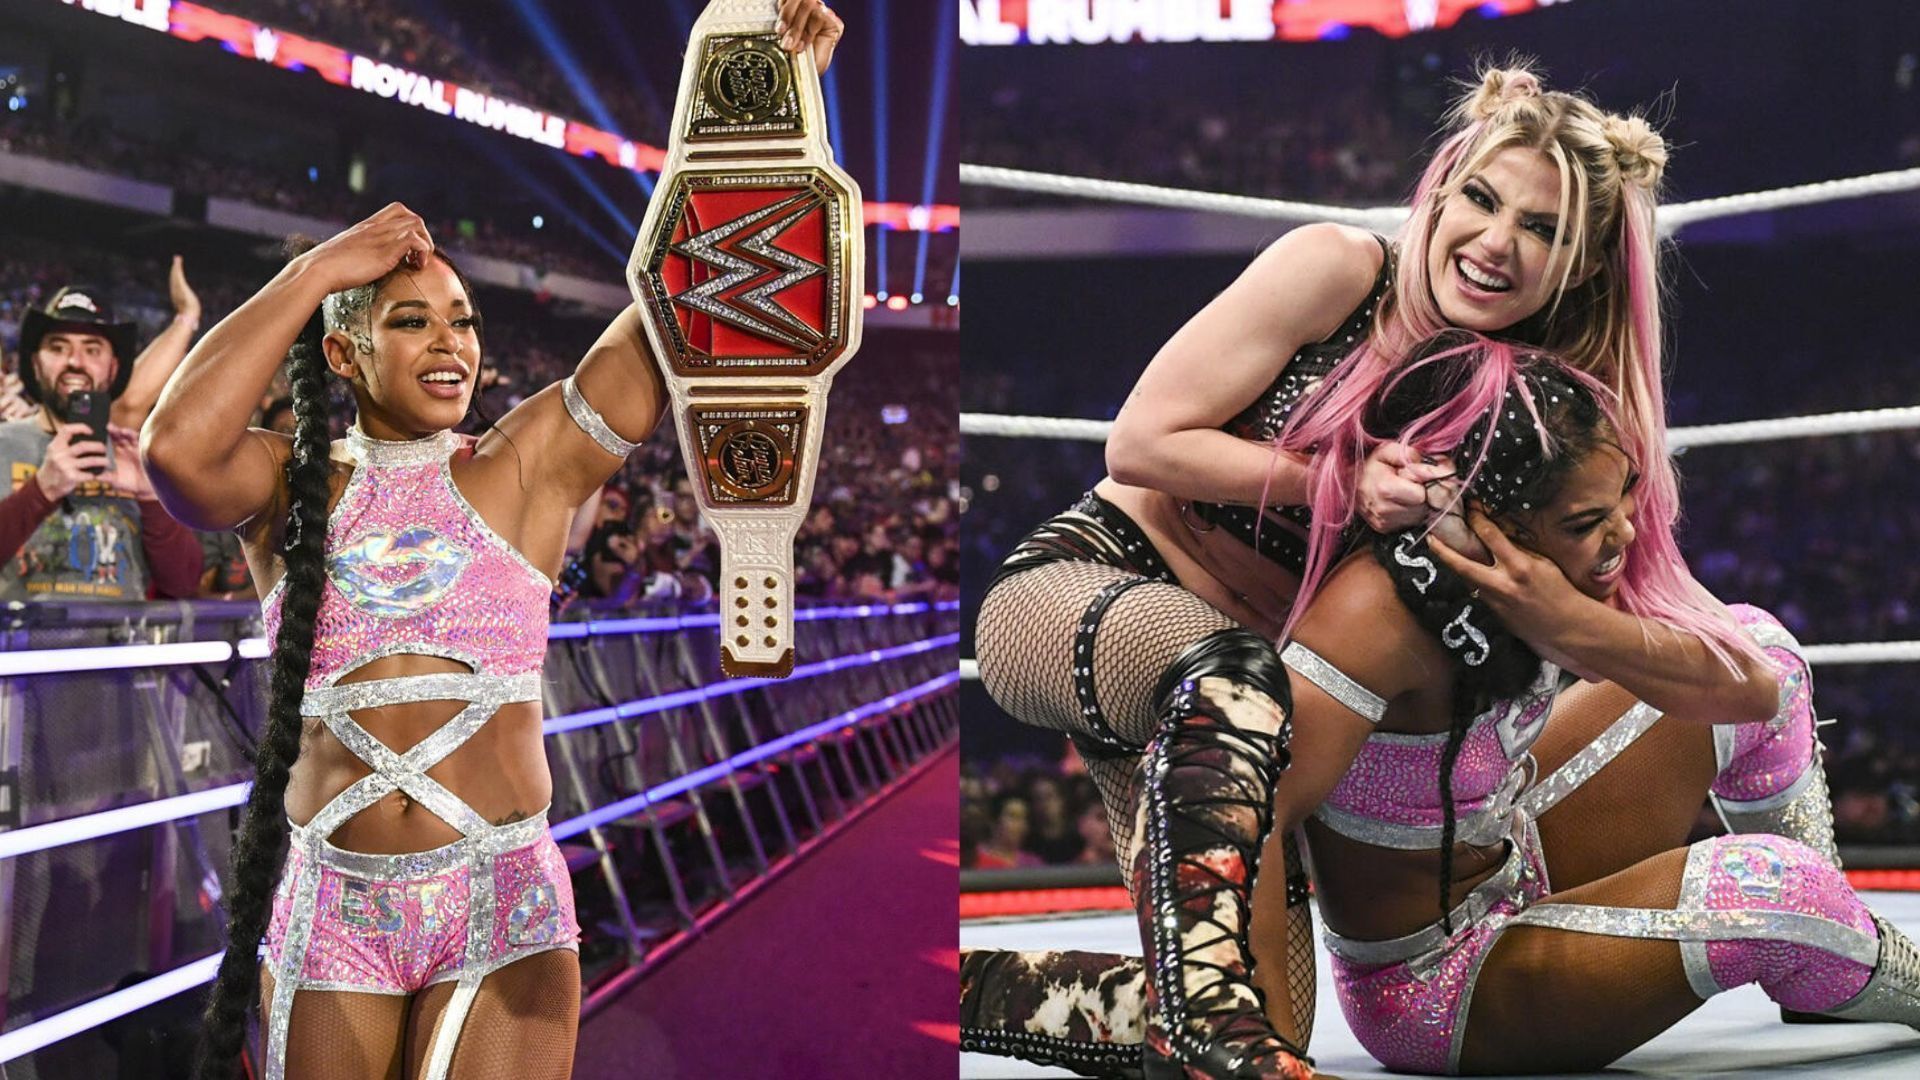 Alexa Bliss and Bianca Belair have crossed paths several times